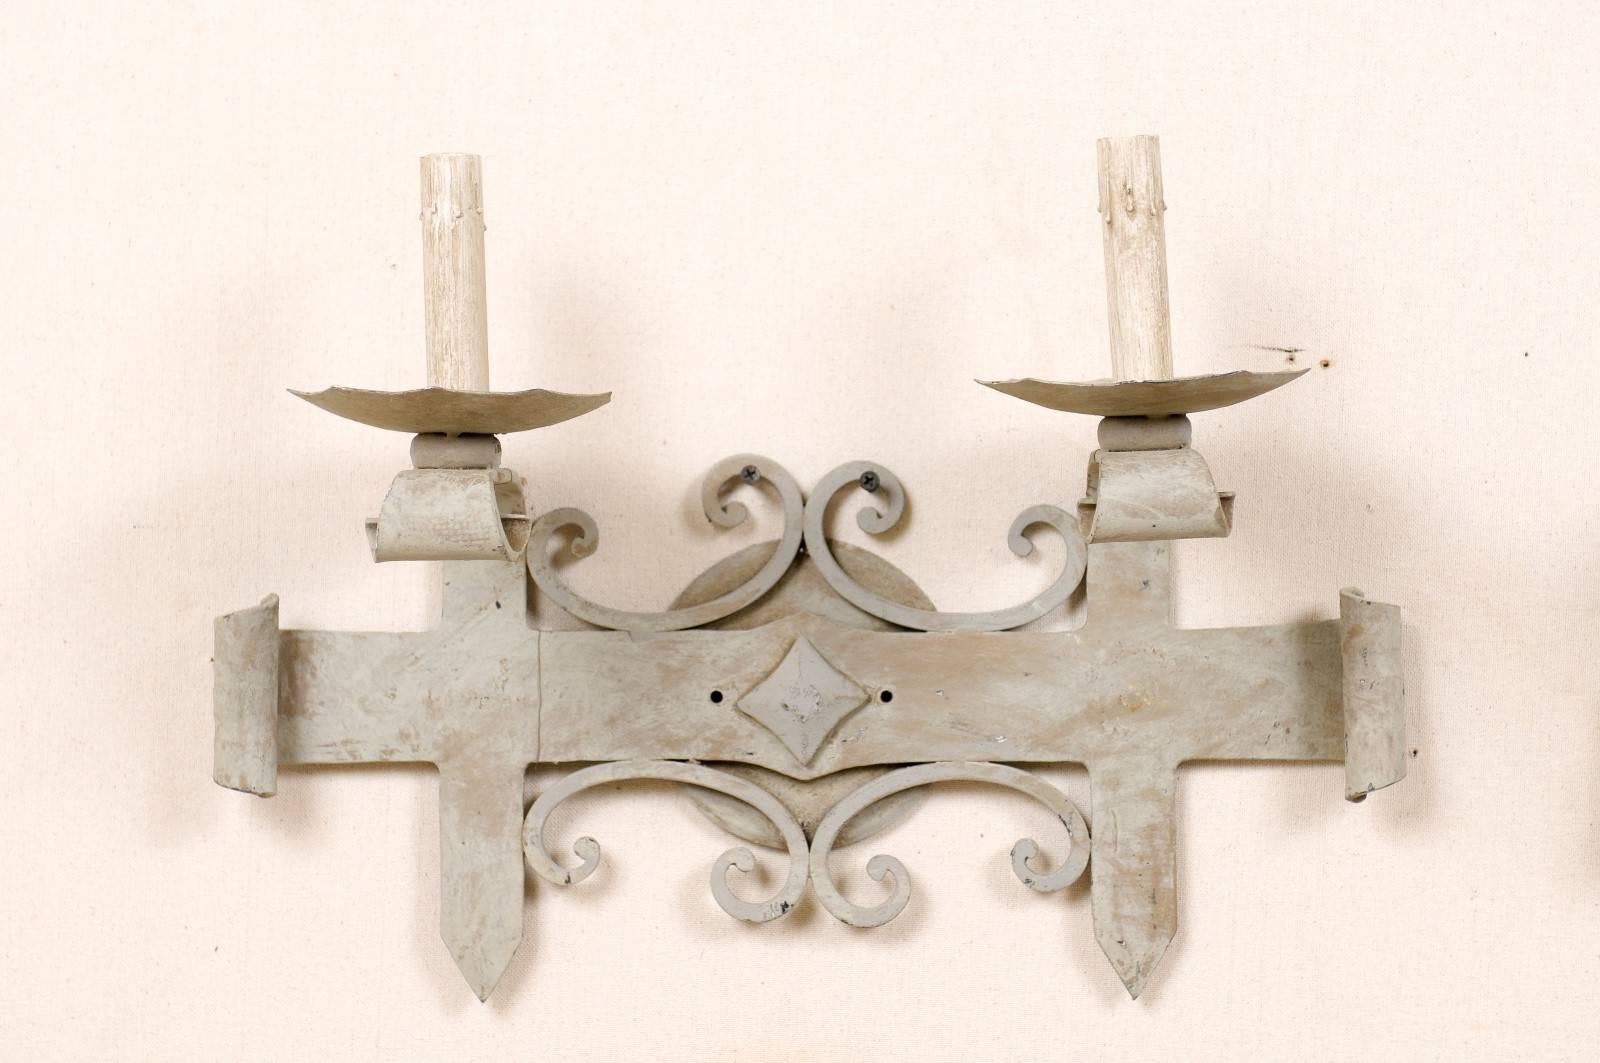 Pair of French Iron Sconces, Soft Blue-Grey Color with Hammered Metal In Good Condition For Sale In Atlanta, GA